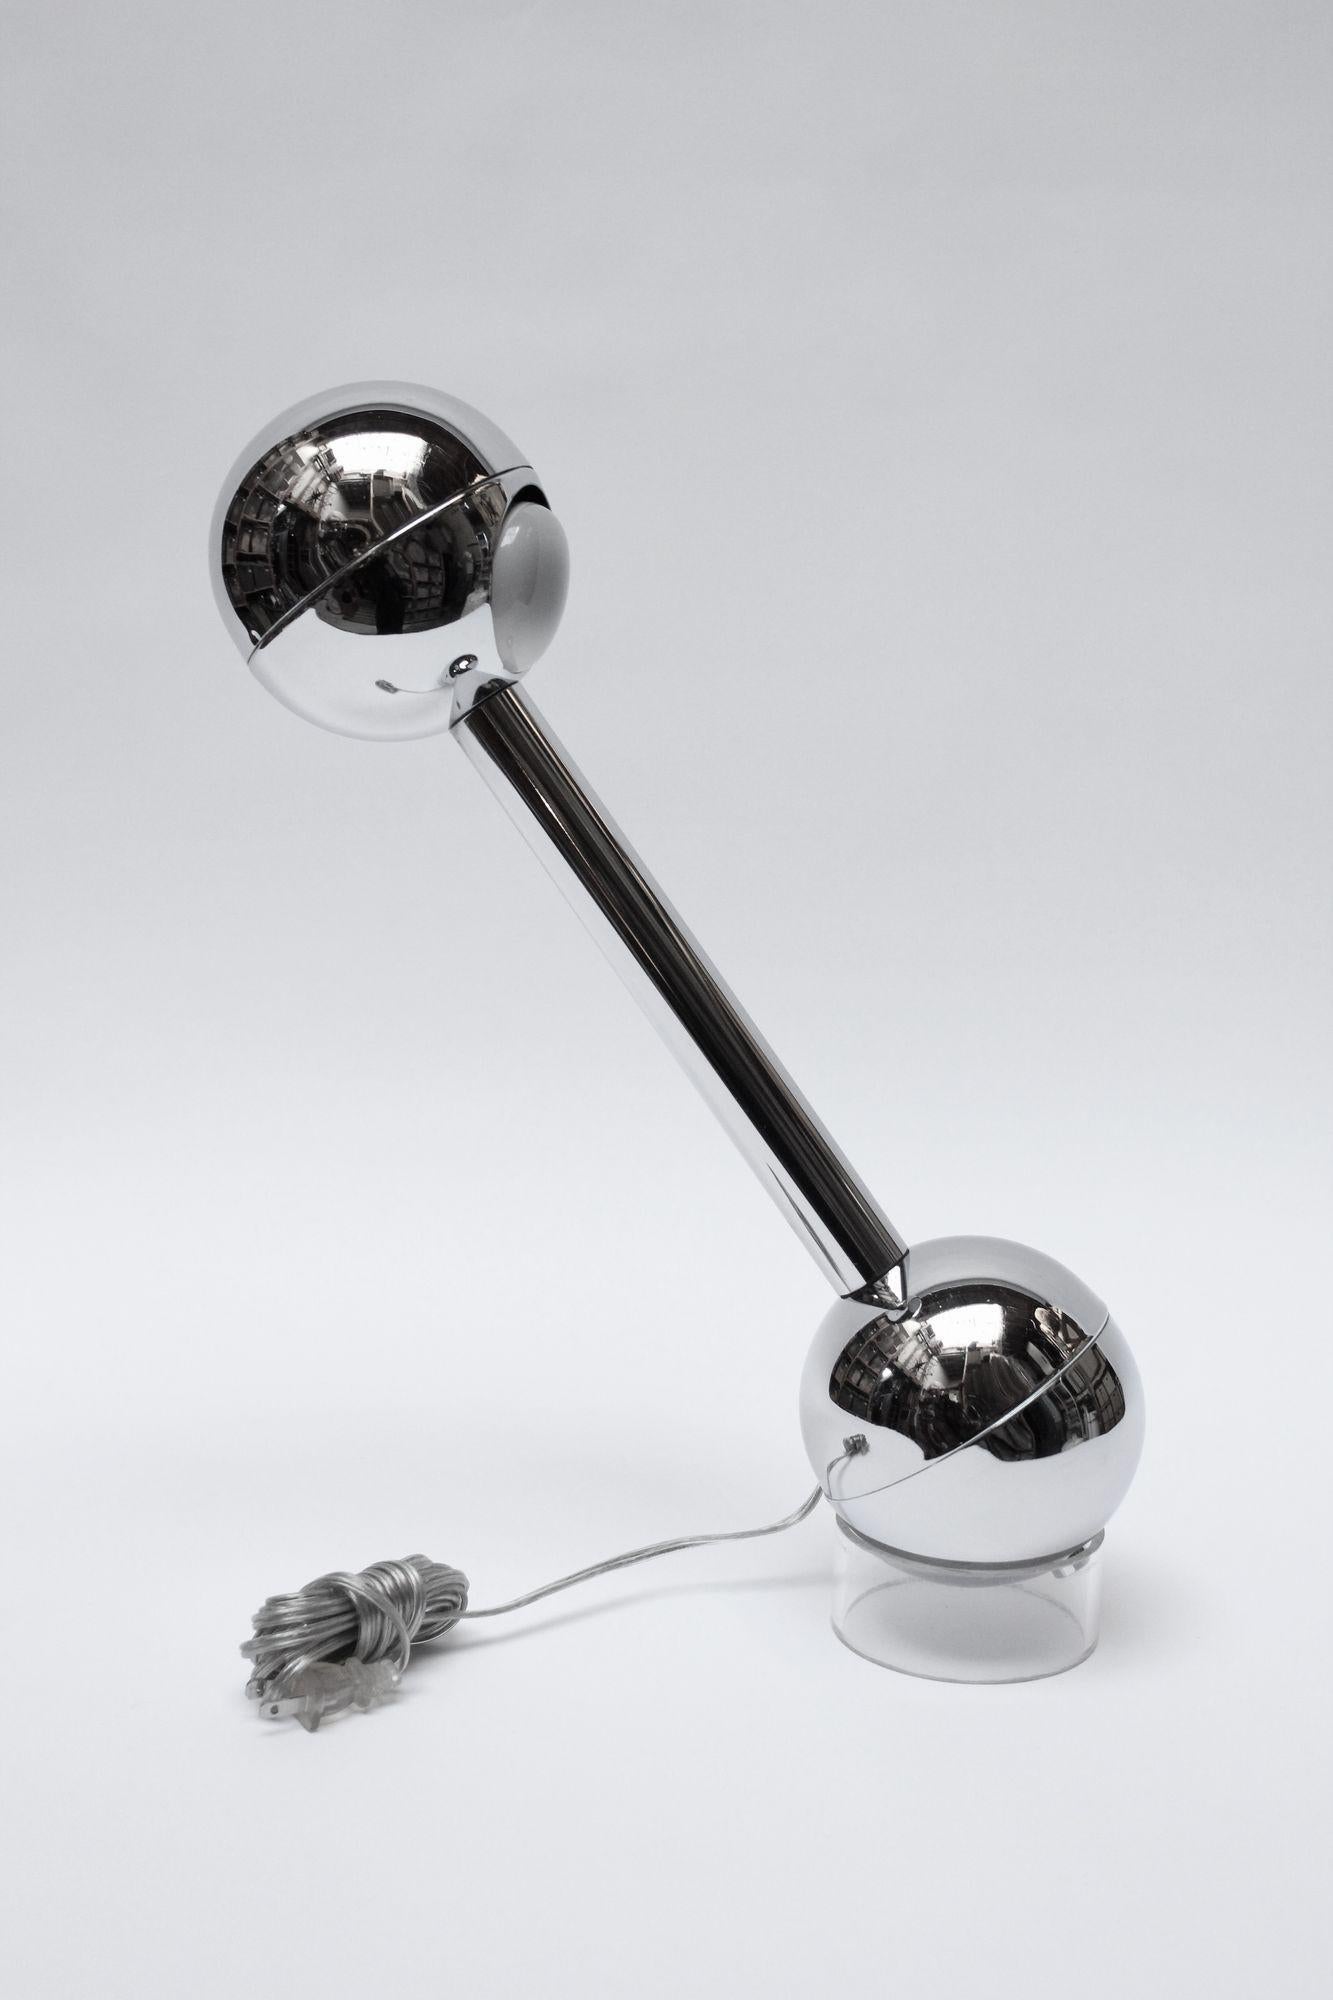 Pierre Cardin 'barbell' pivoting chrome table lamp (ca. 1960s, France). Similar to a version by John Mascheroni for Kovacs lamp with slight design and material disparities. 
The on/off operation is controlled internally by a mercury switch, which